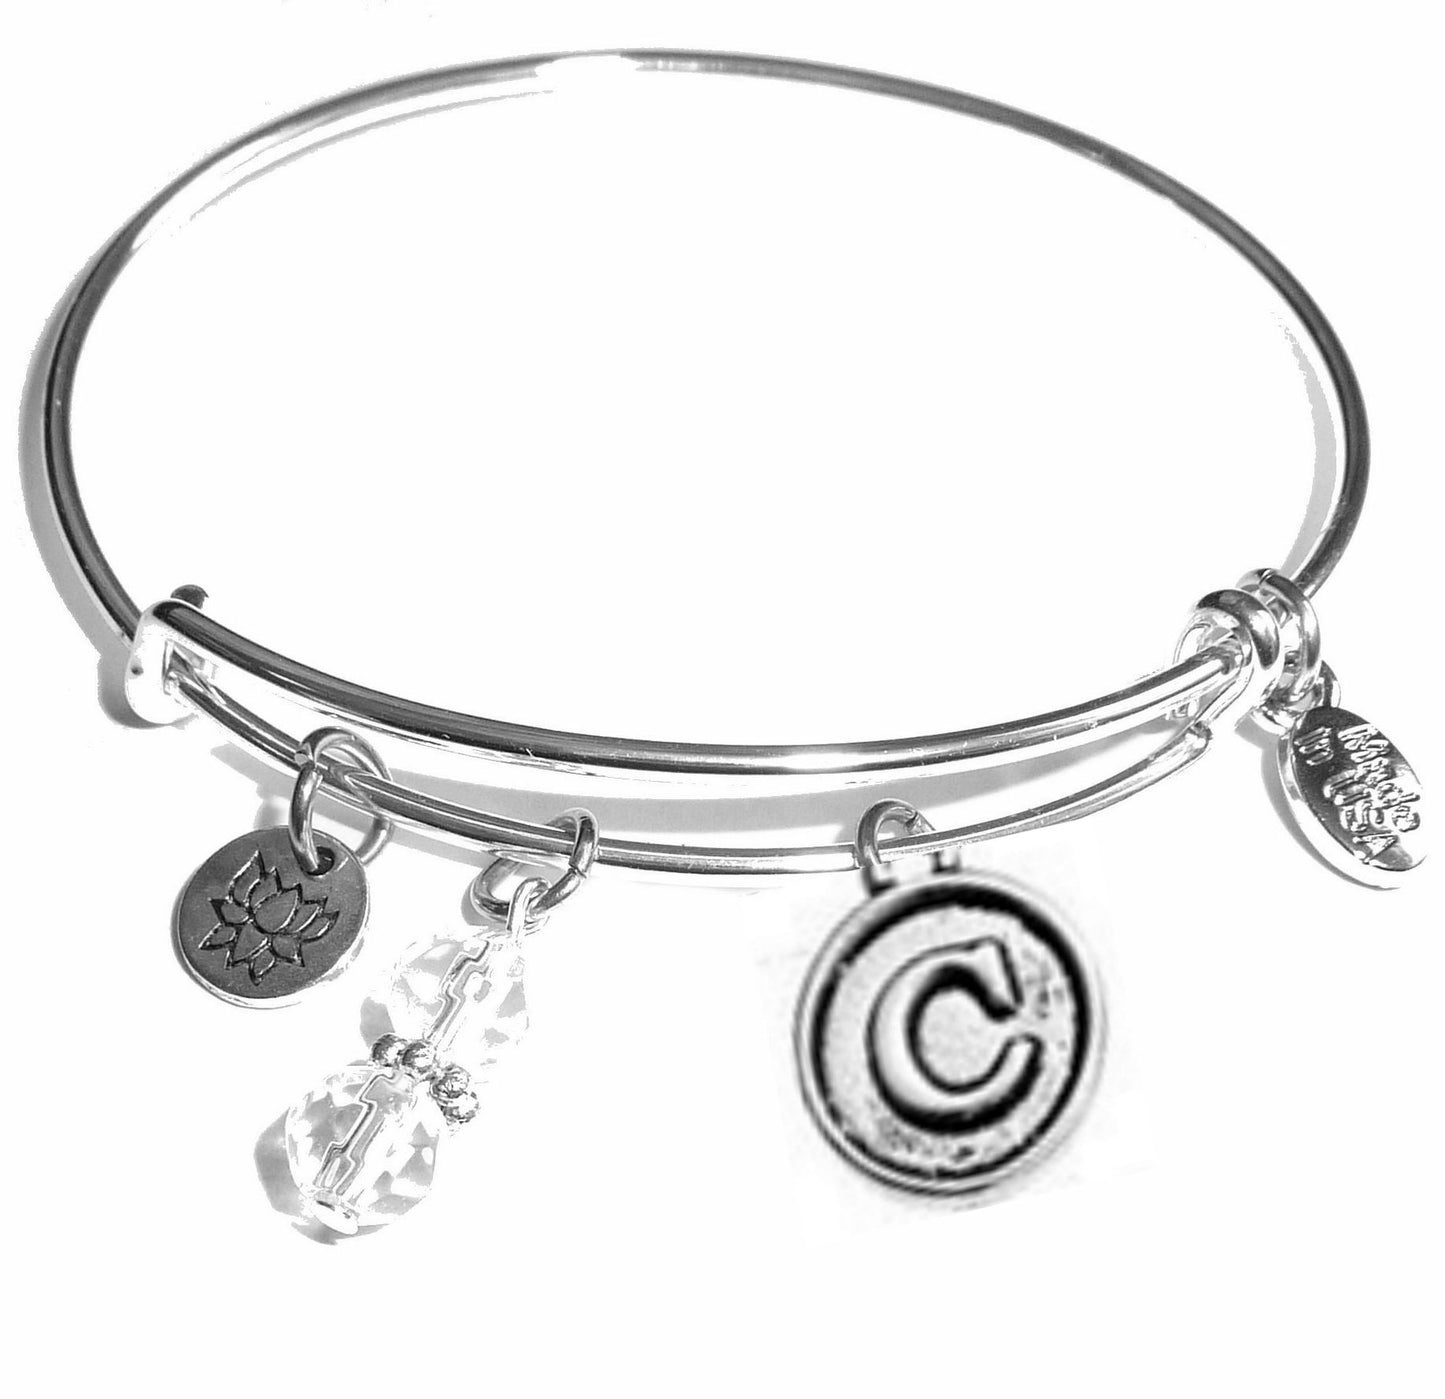 C - Initial Bangle Bracelet -Expandable Wire Bracelet– Comes in a gift box